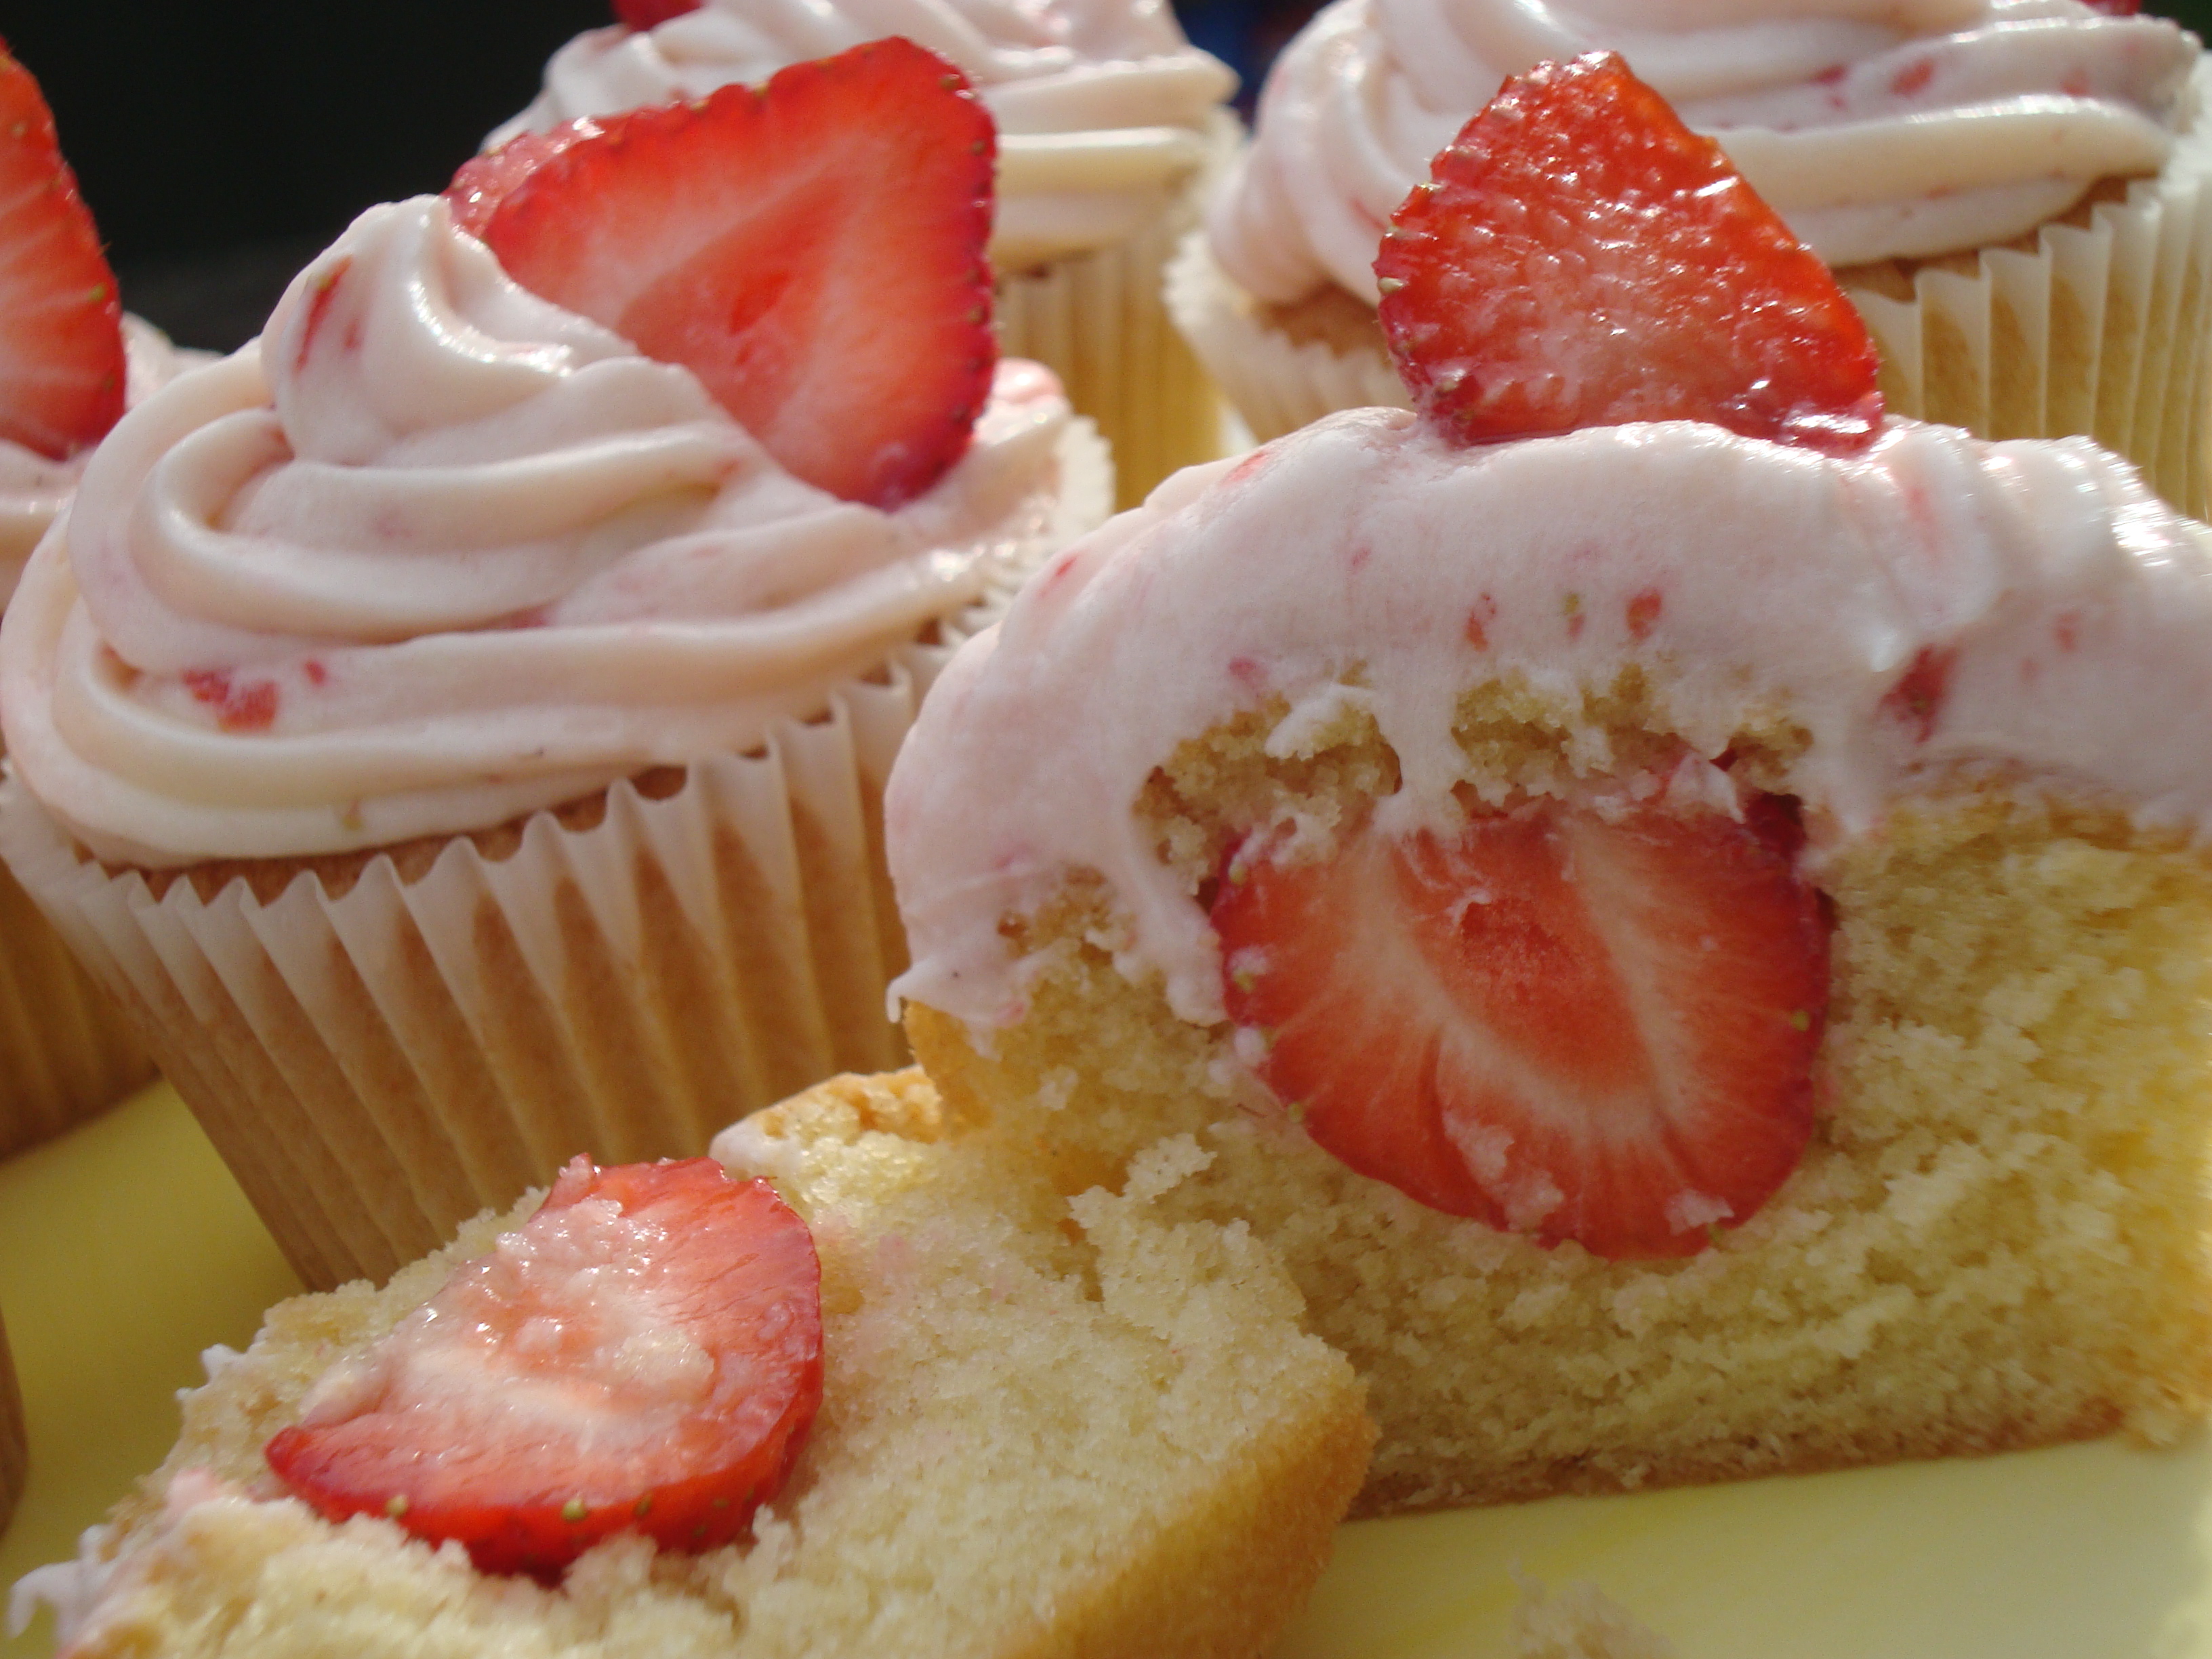 9 Photos of Summer Cupcakes With Strawberry